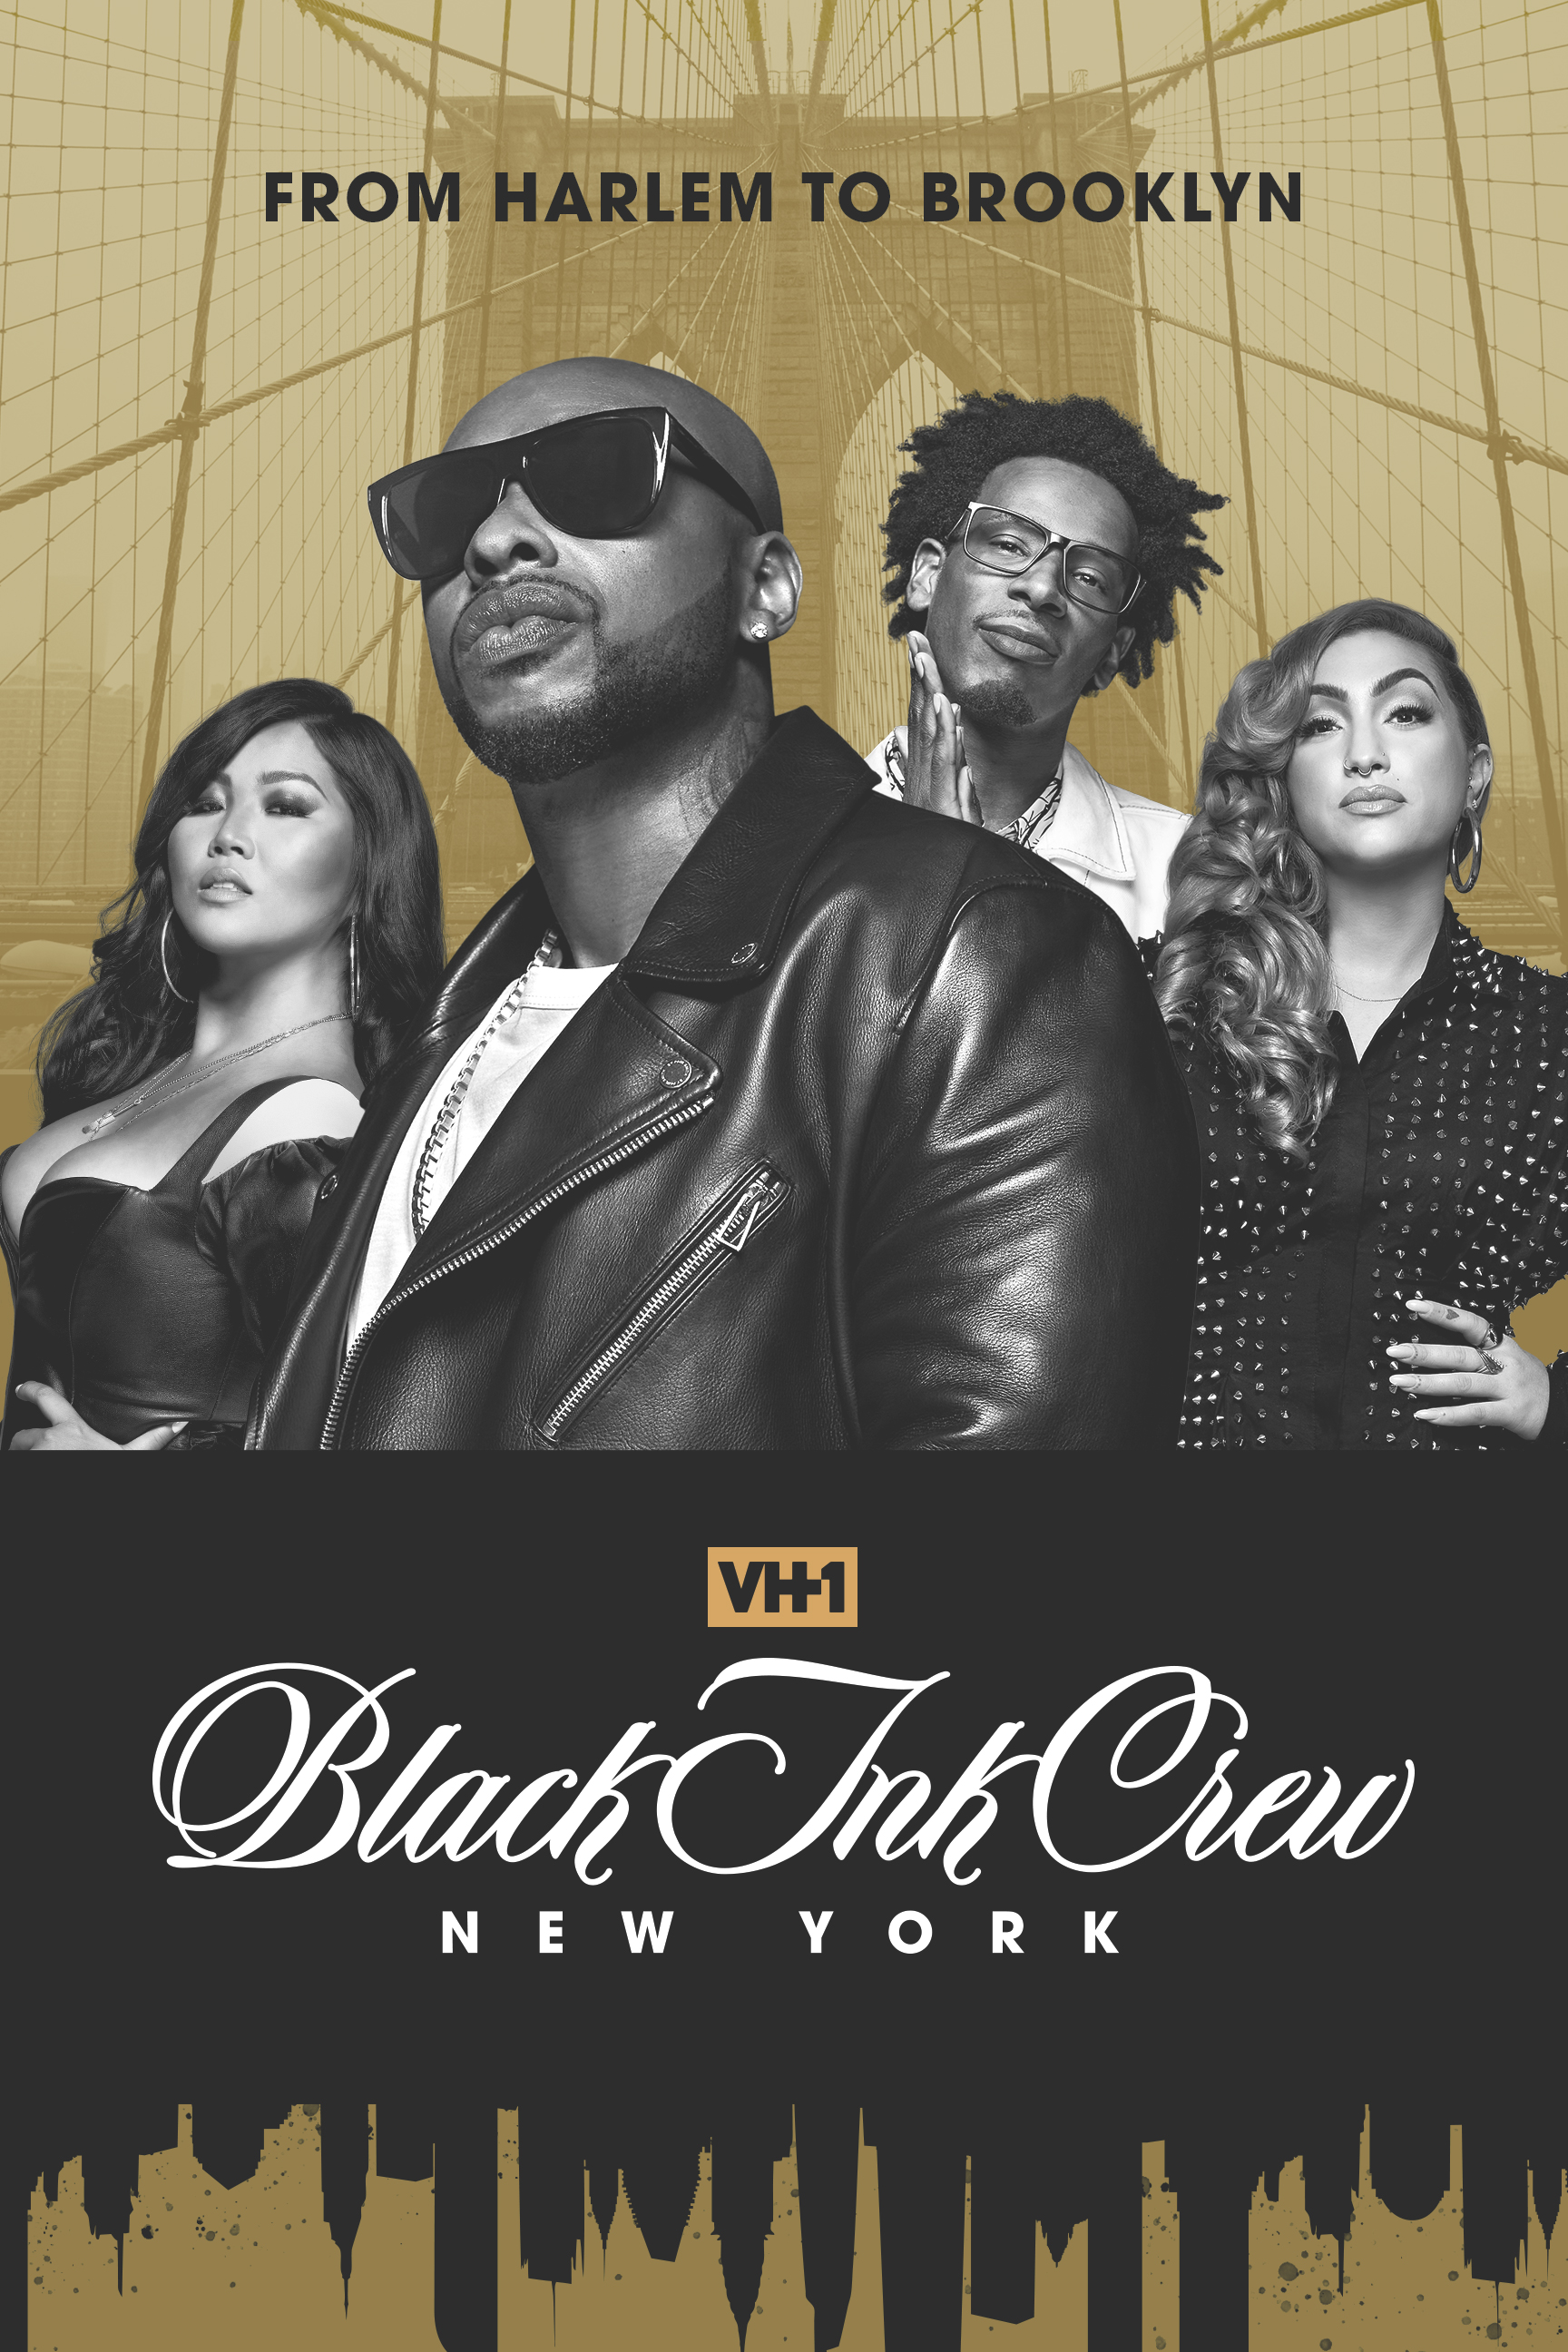 Black Ink Crew Season 7: Ceaser and the Crew Returns to VH1! (EXCLUSIVE)